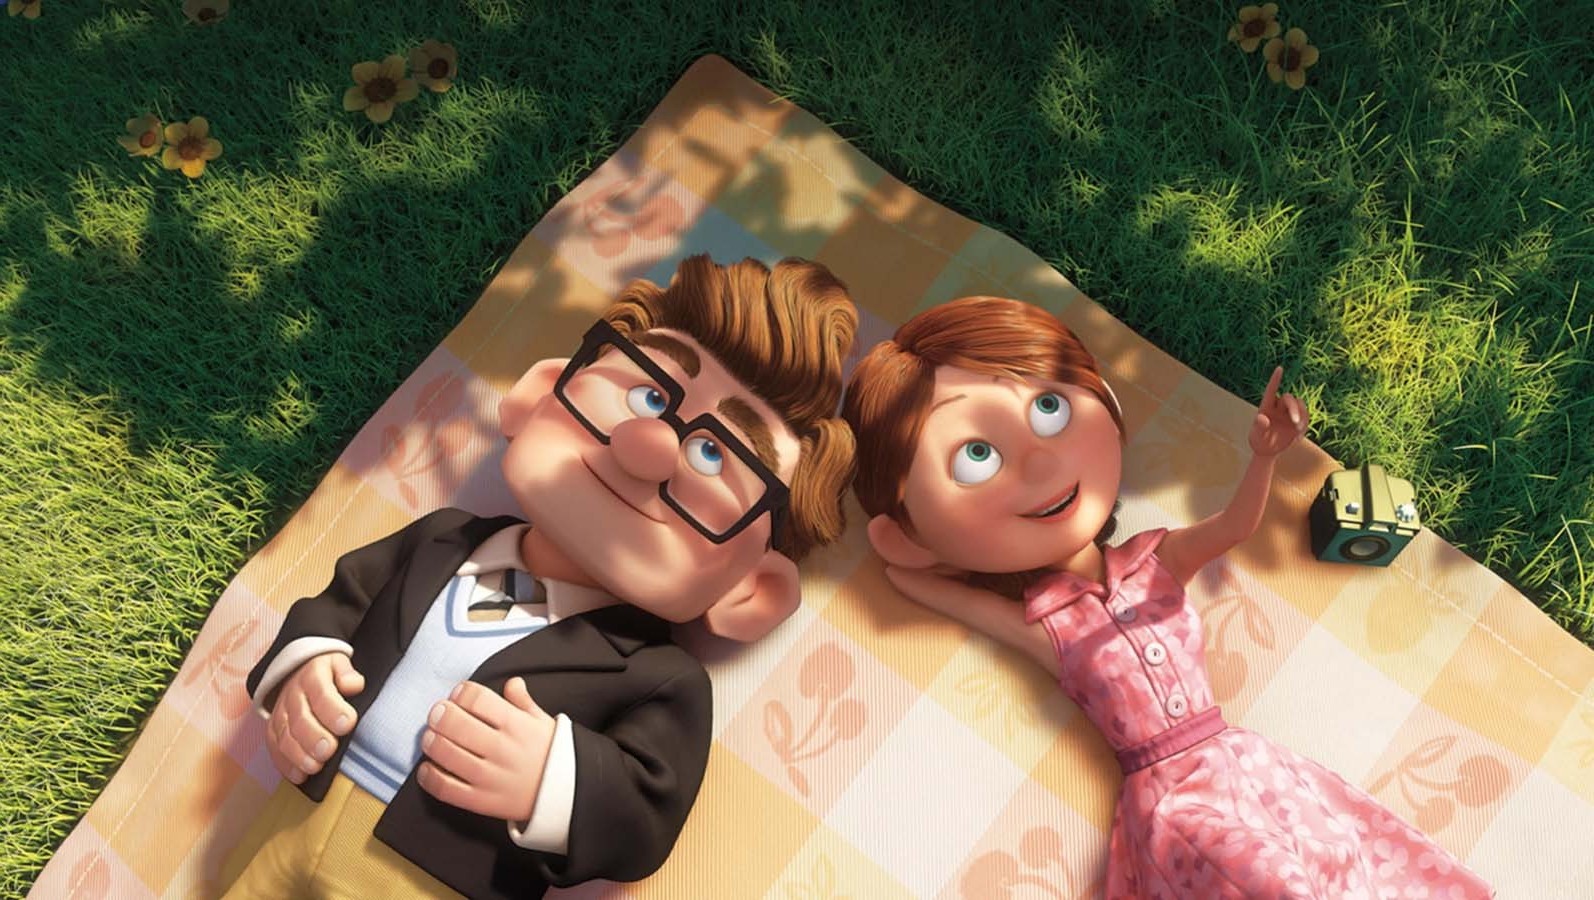 Up (movie) Wallpapers HD / Desktop and Mobile Backgrounds